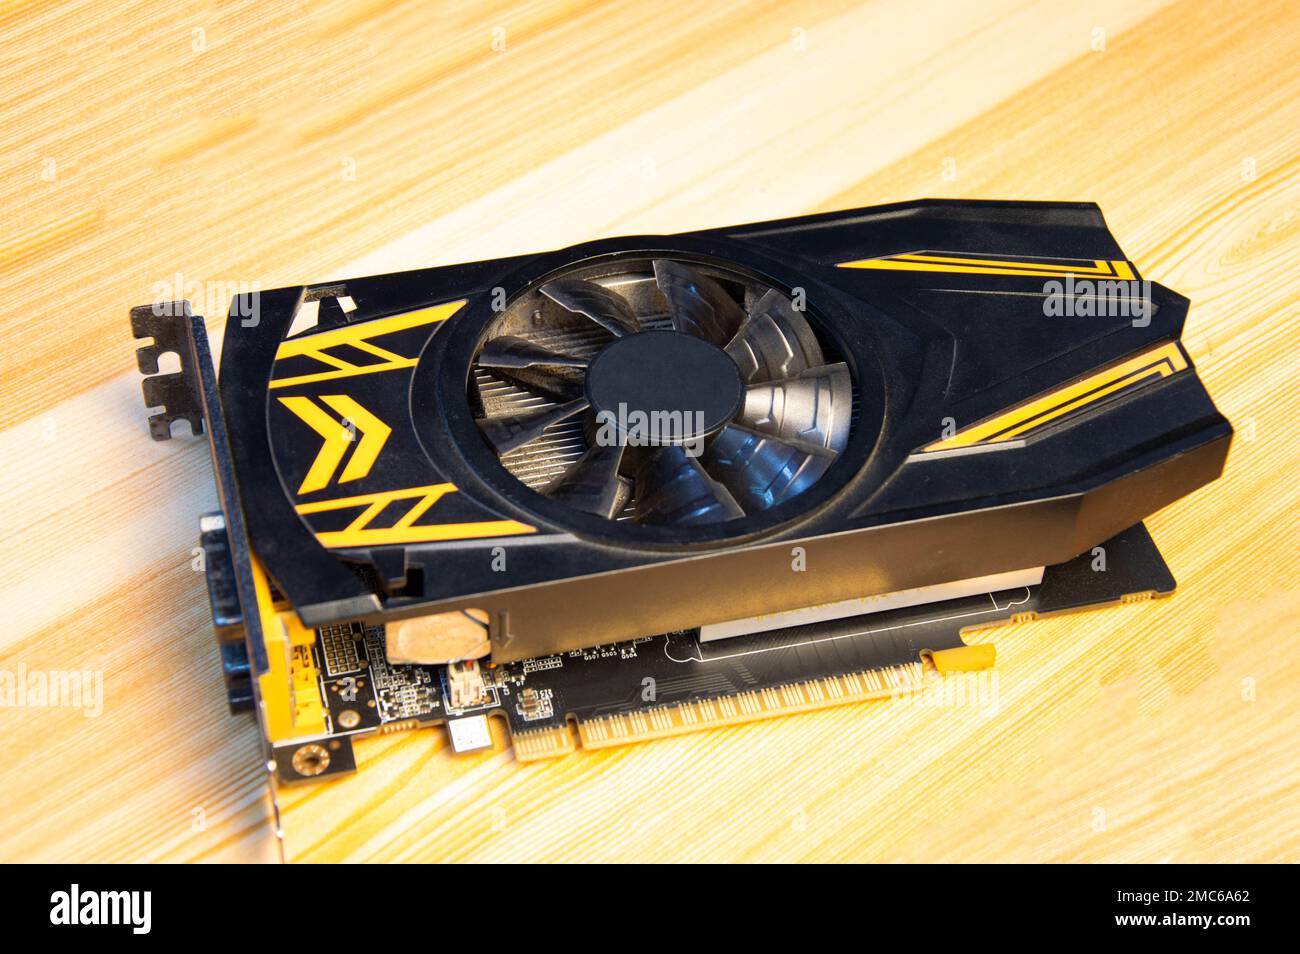 computer graphics card old condition placed on wooden floor Stock Photo